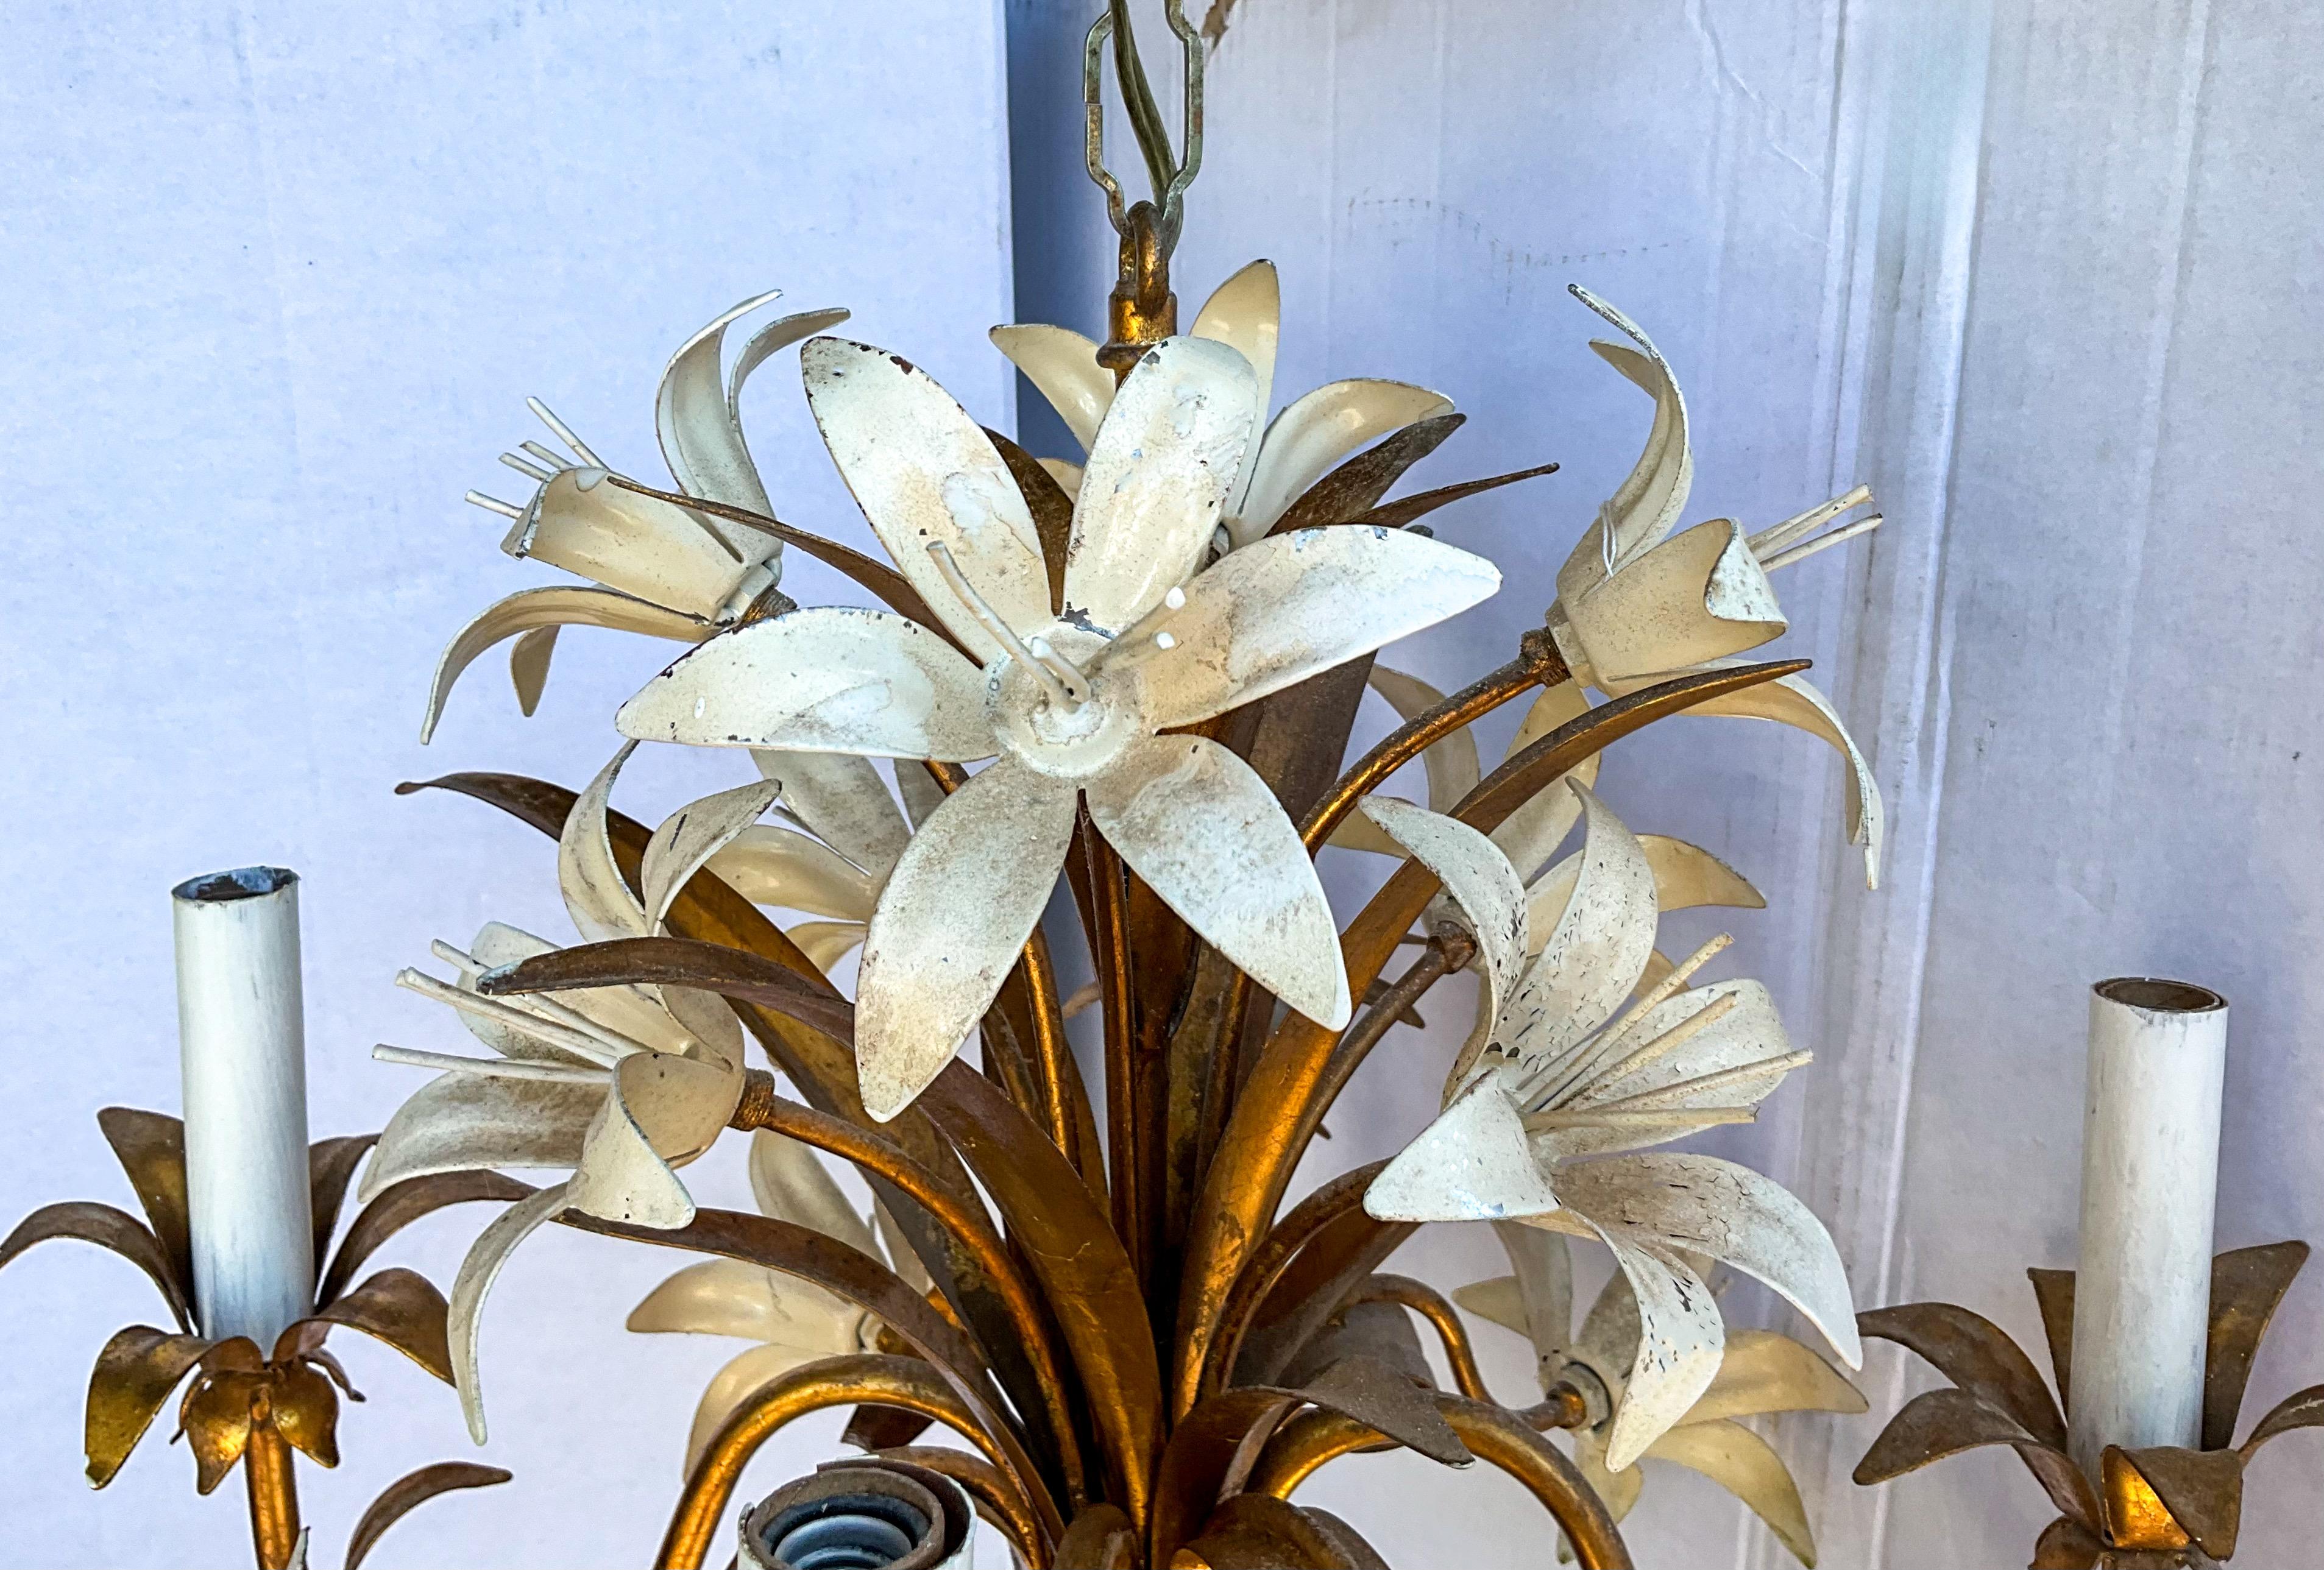 20th Century Mid-Century Hollywood Regency Italian Gilt Tole Chandelier With Lilies - 6 Arm For Sale